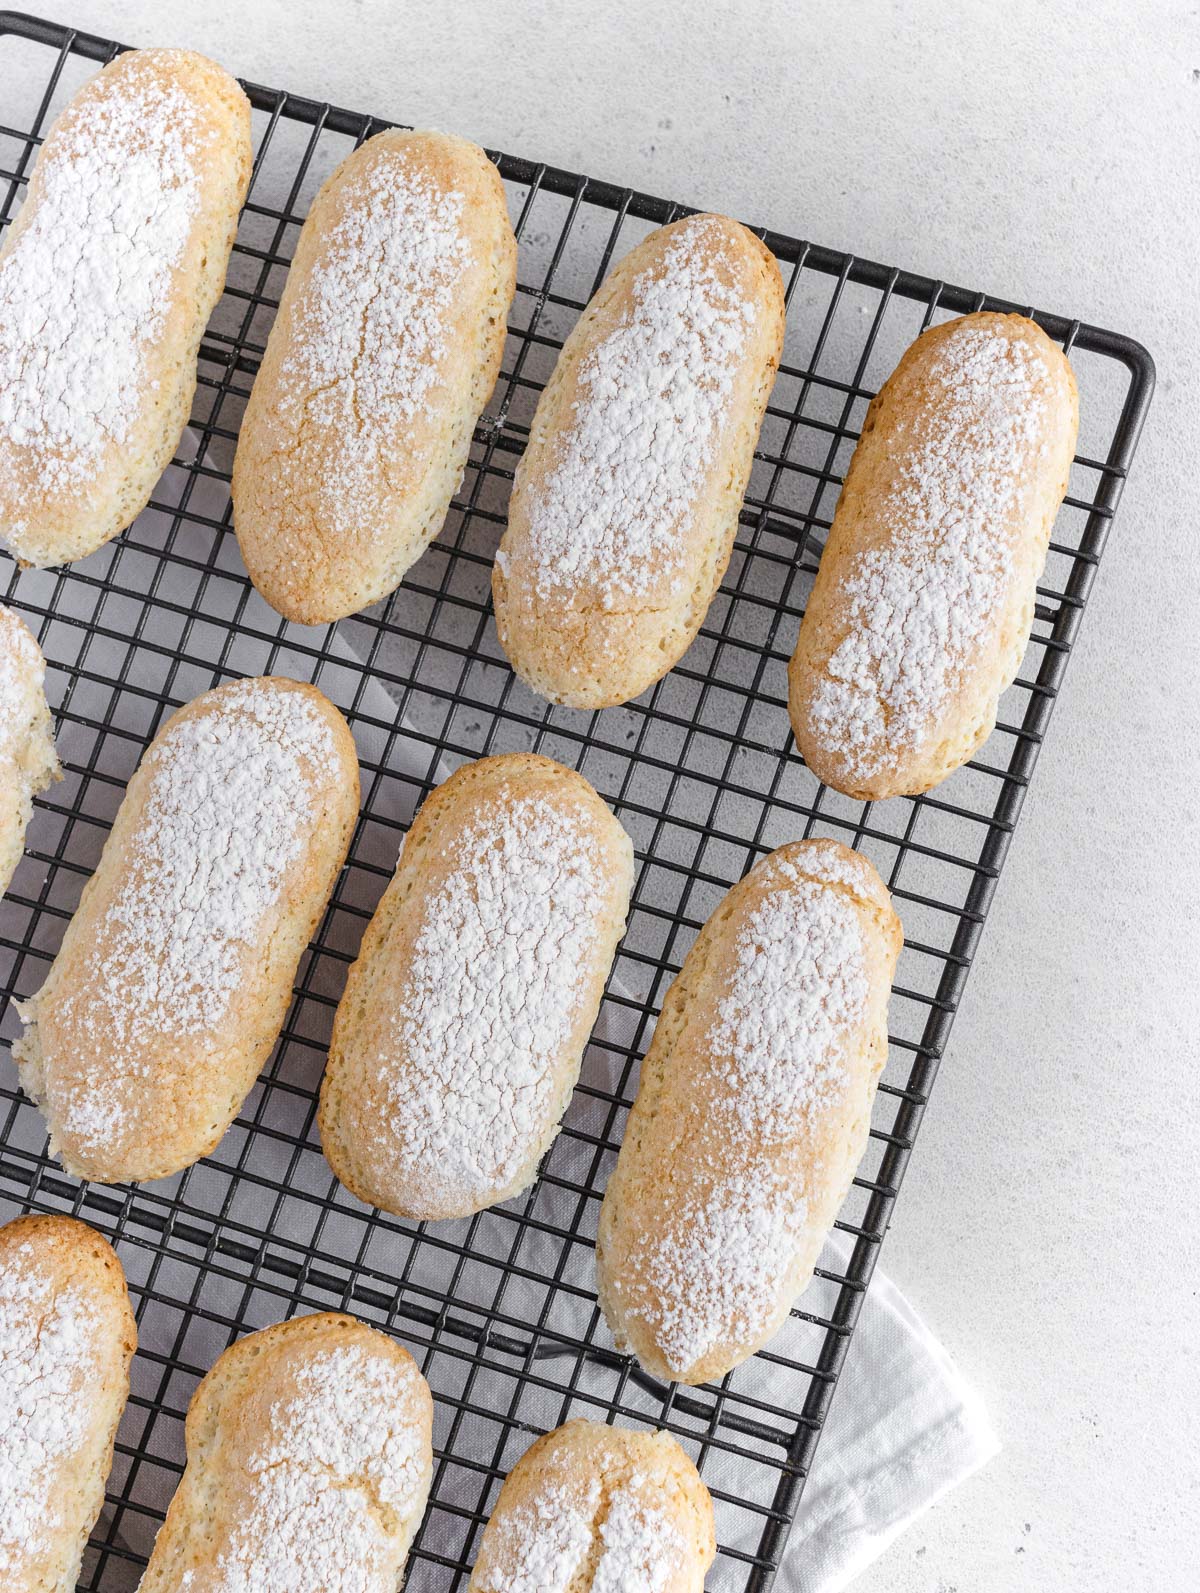 ladyfingers on a cooling rack